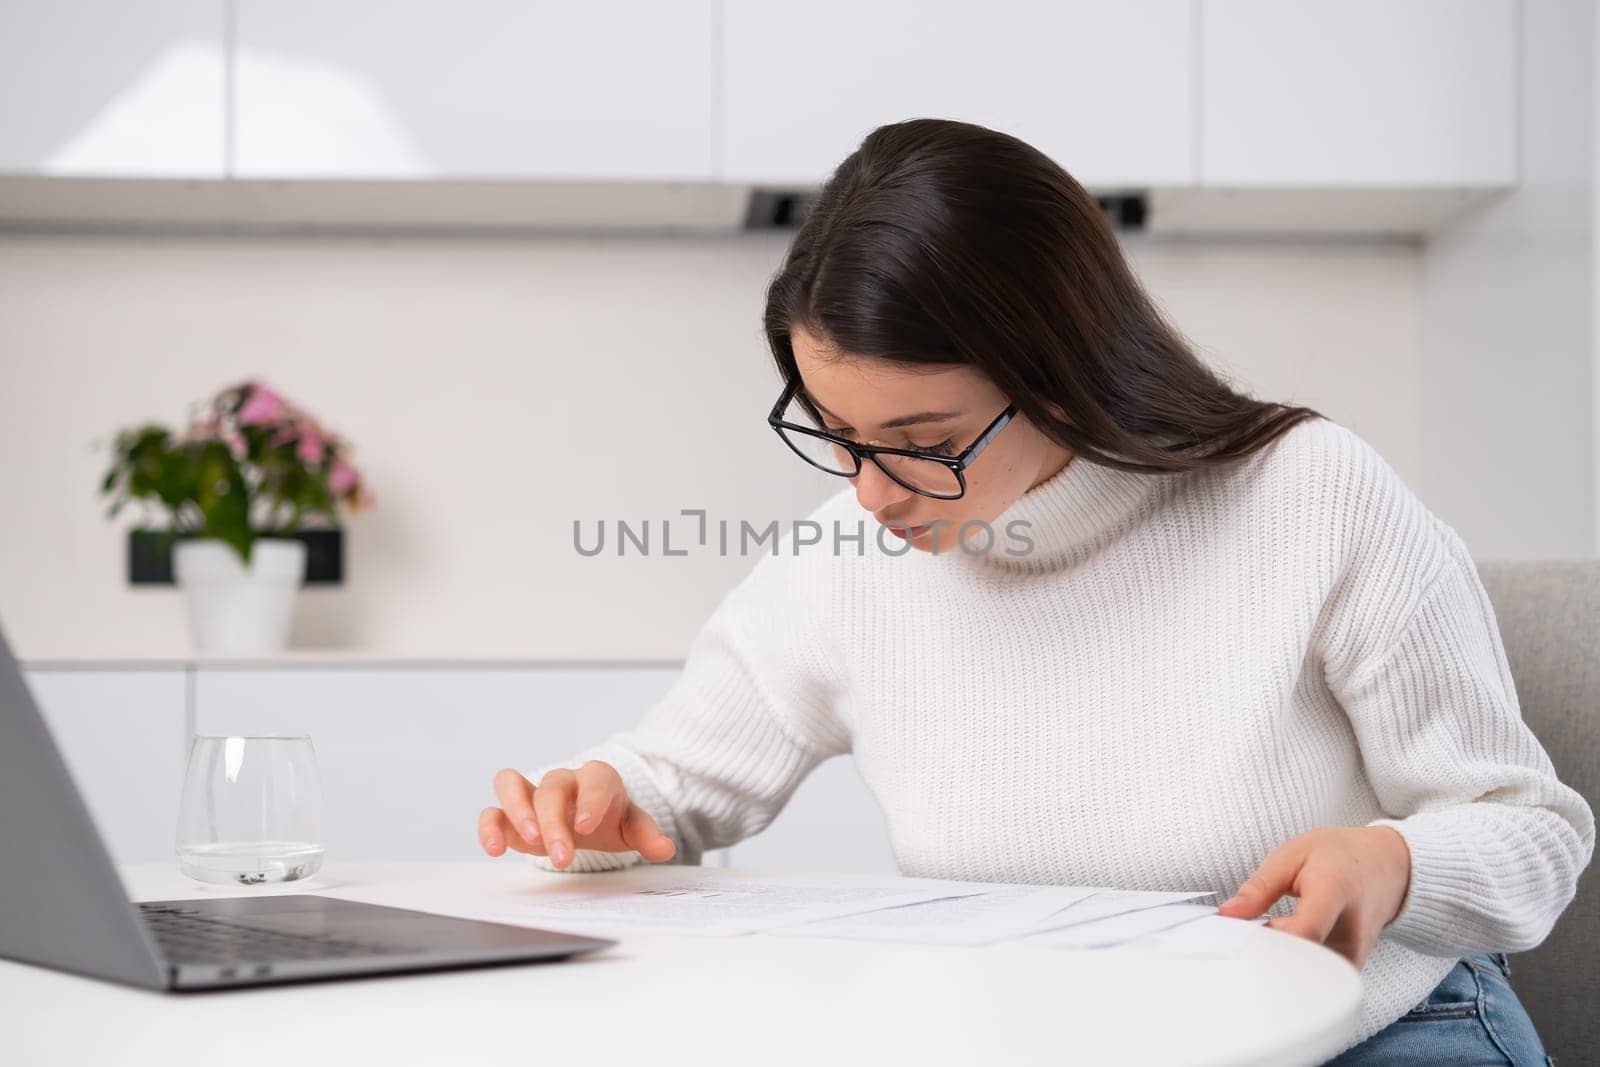 Beautiful young housewife checks bills with serious expression on her face.